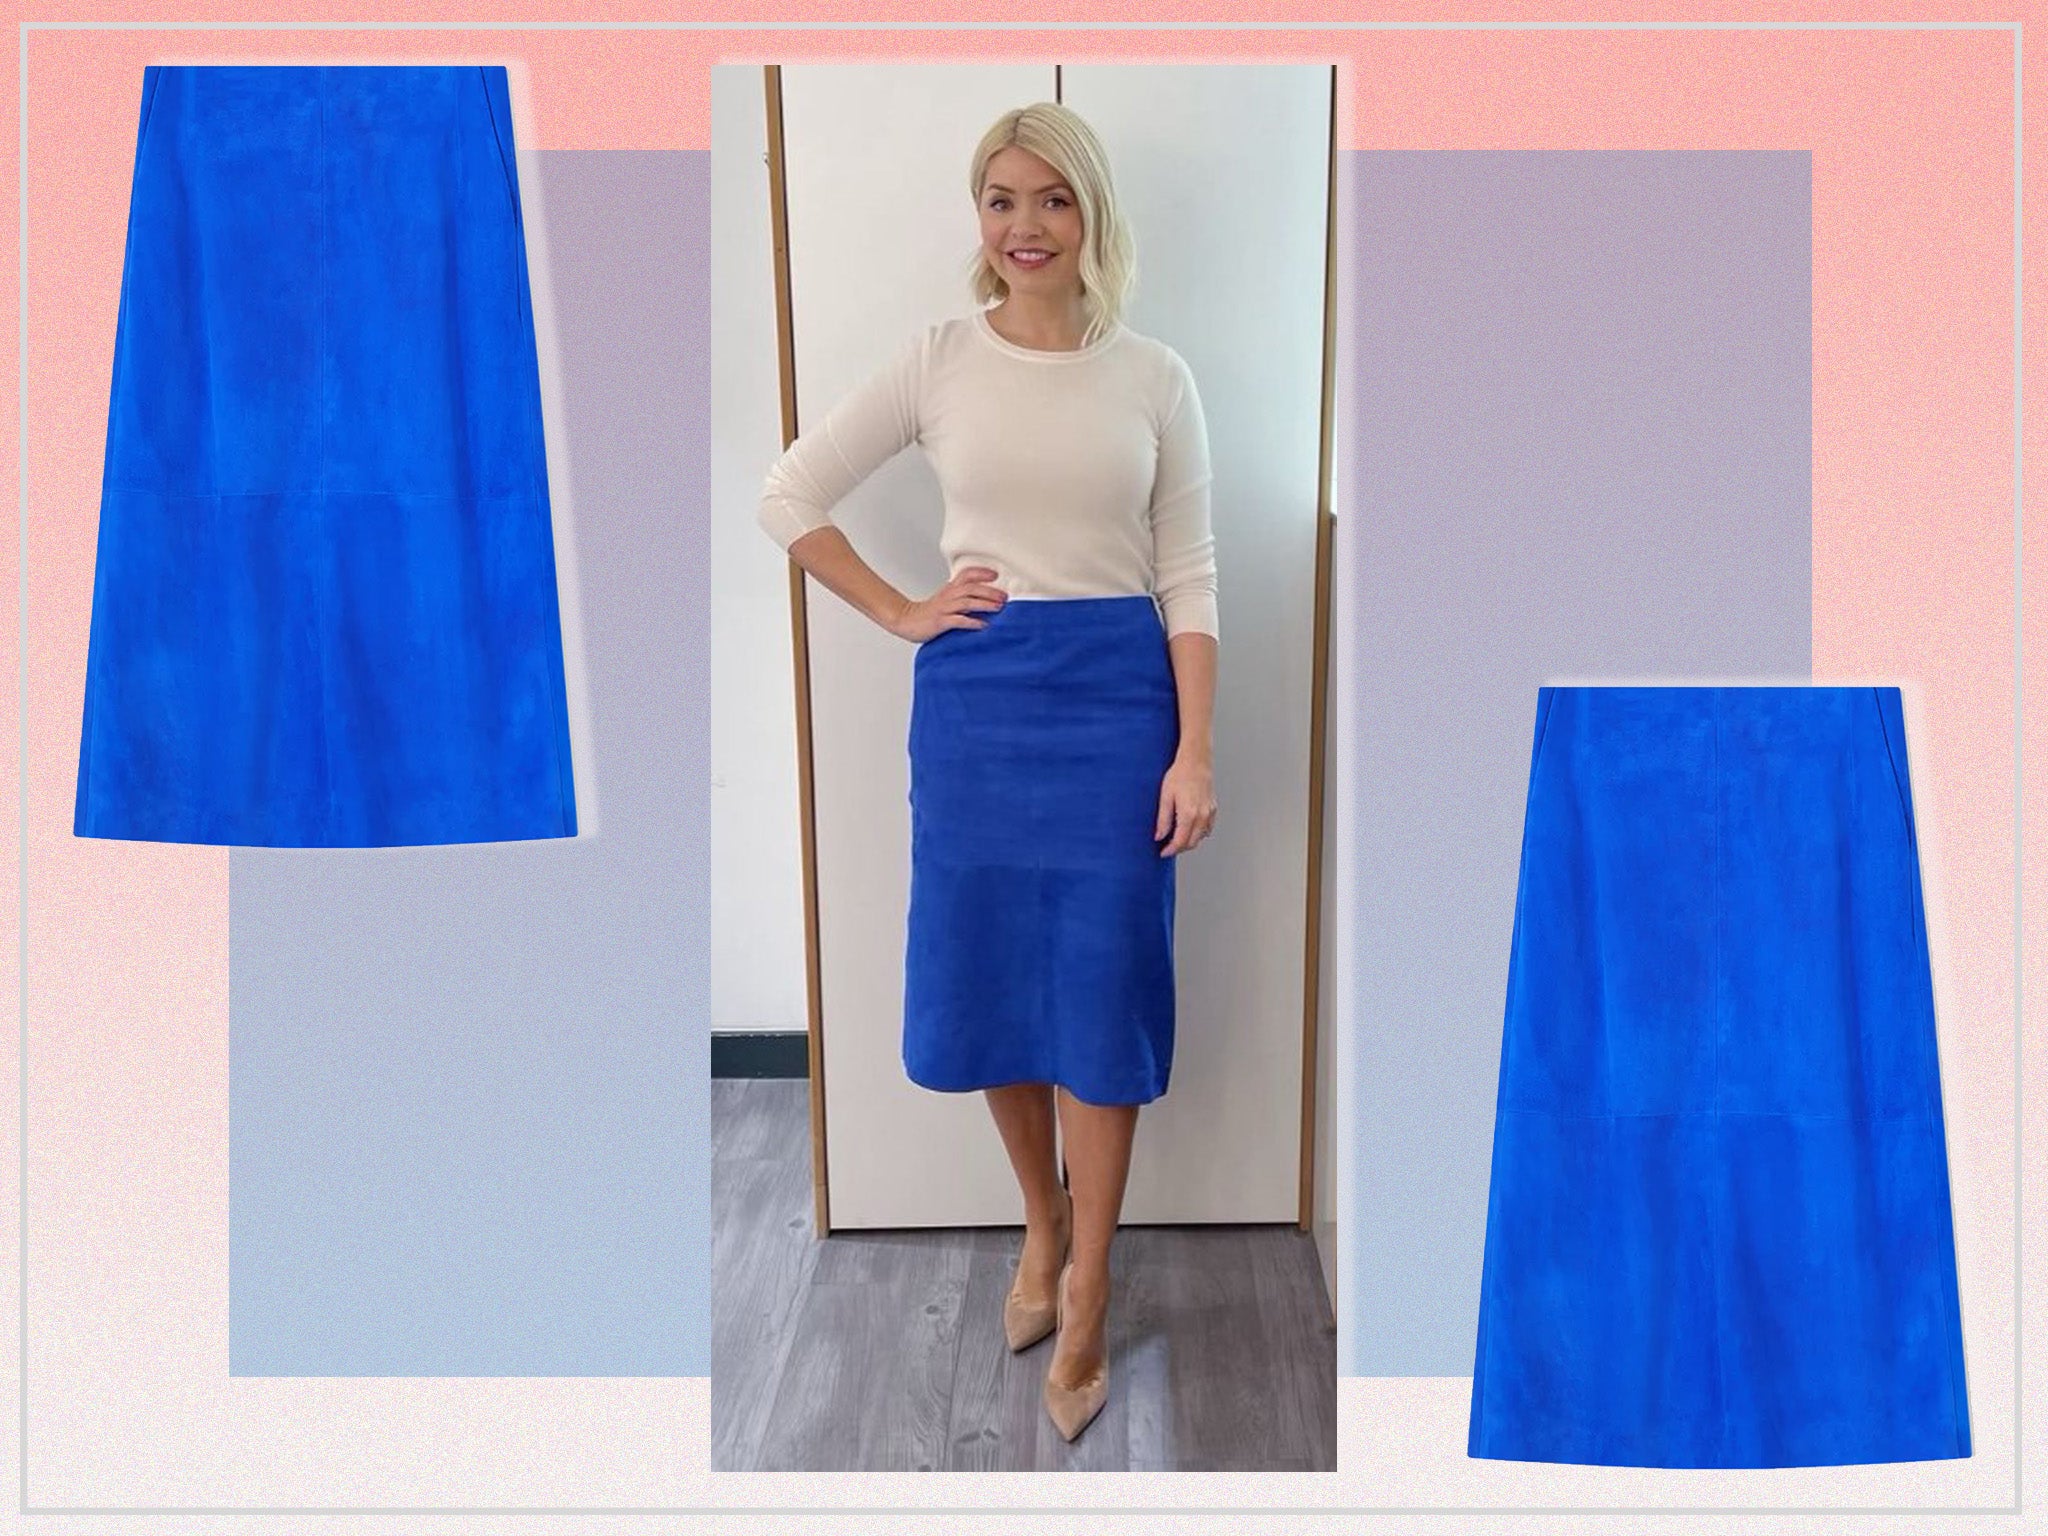 The skirt hails from one of the presenter’s favourite high-street labels